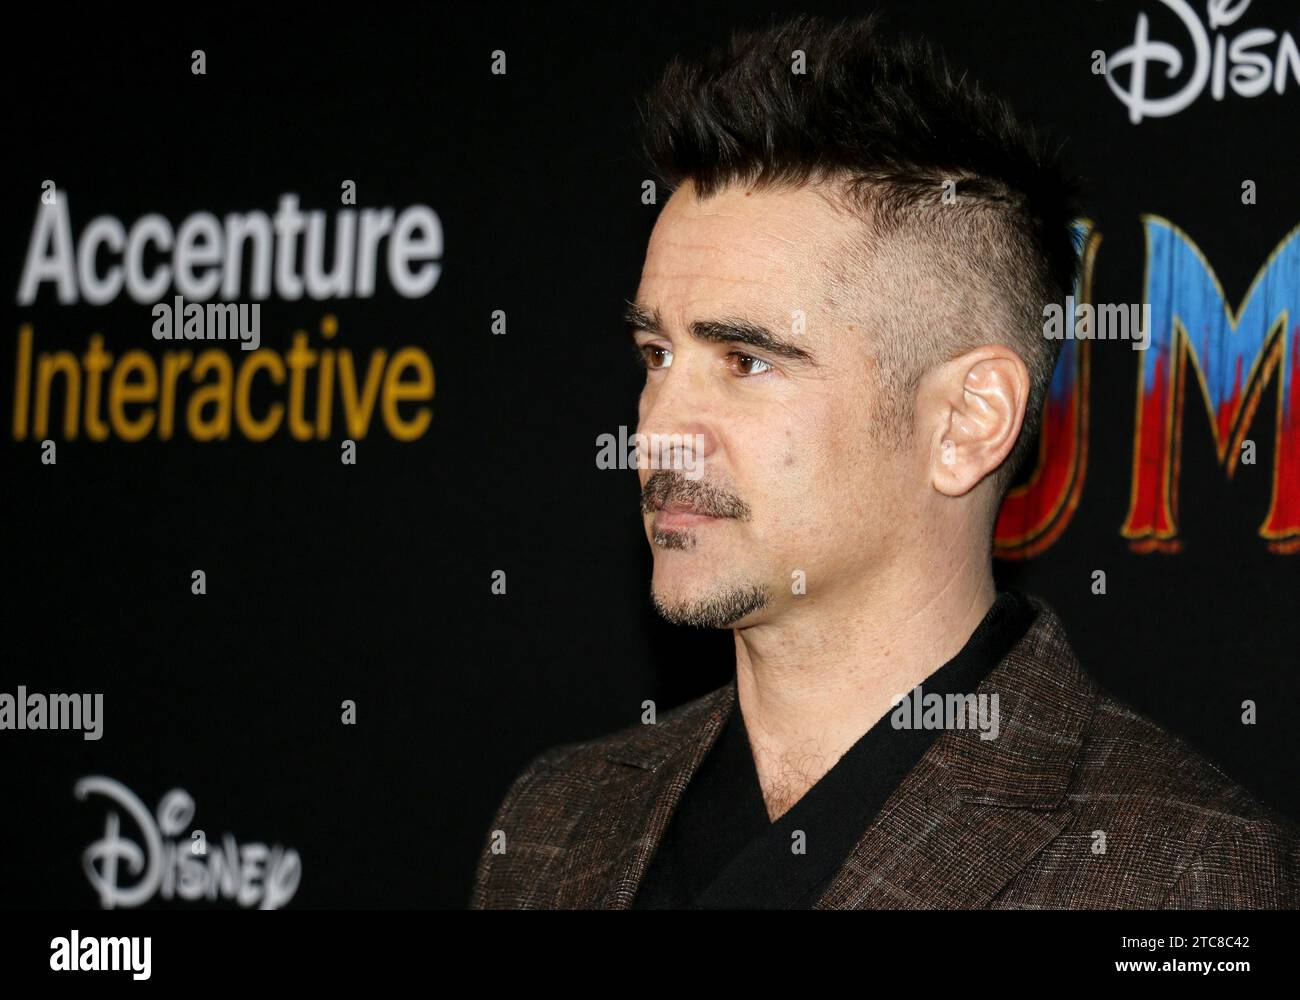 Colin Farrell at the World premiere of 'Dumbo' held at the El Capitan Theatre in Hollywood, USA on March 11, 2019 Stock Photo